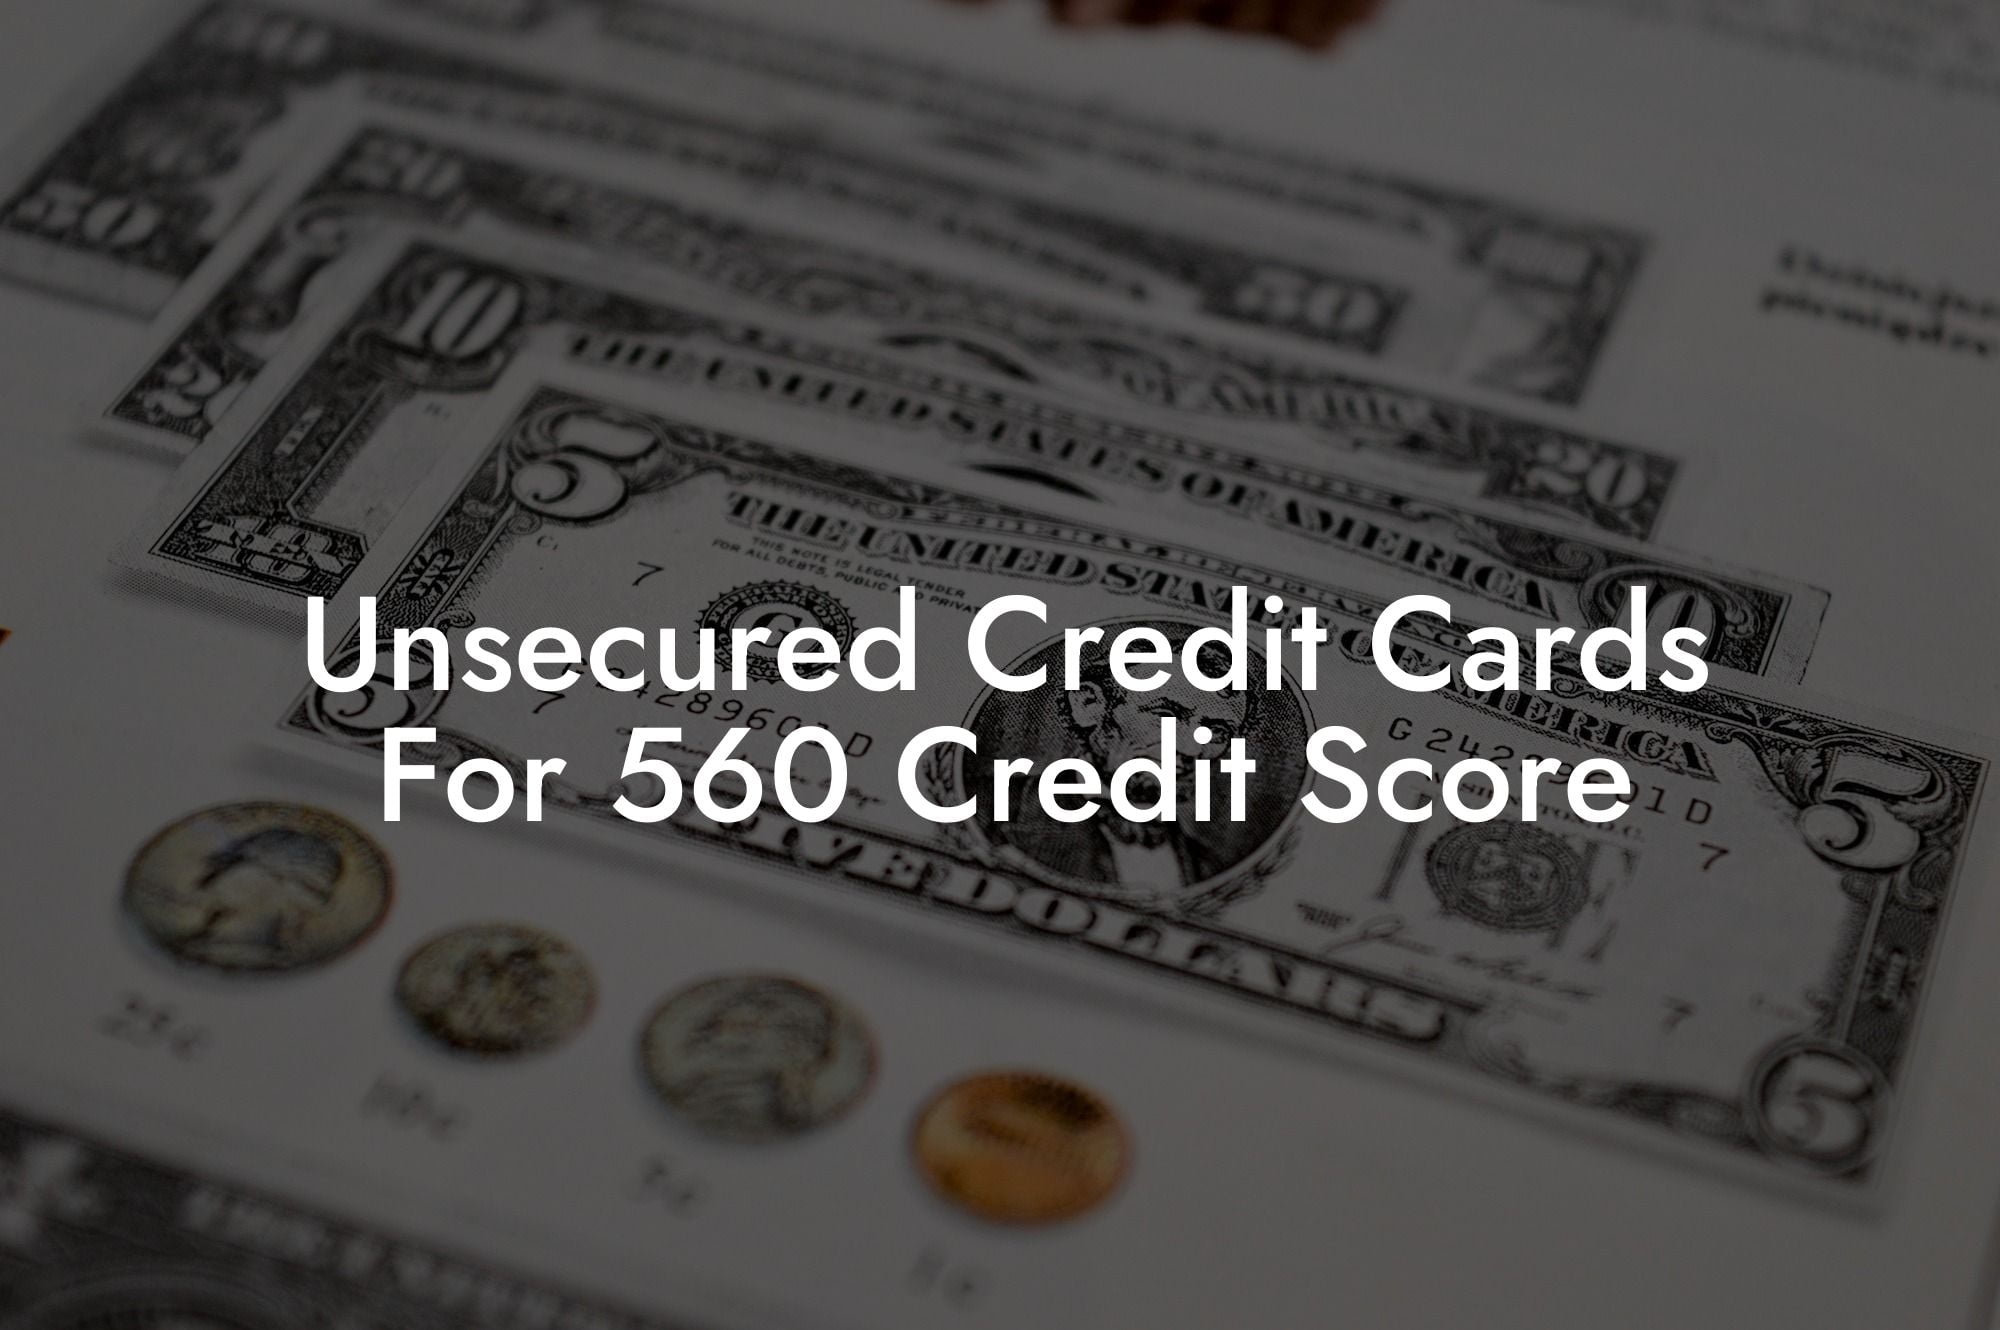 Unsecured Credit Cards For 560 Credit Score